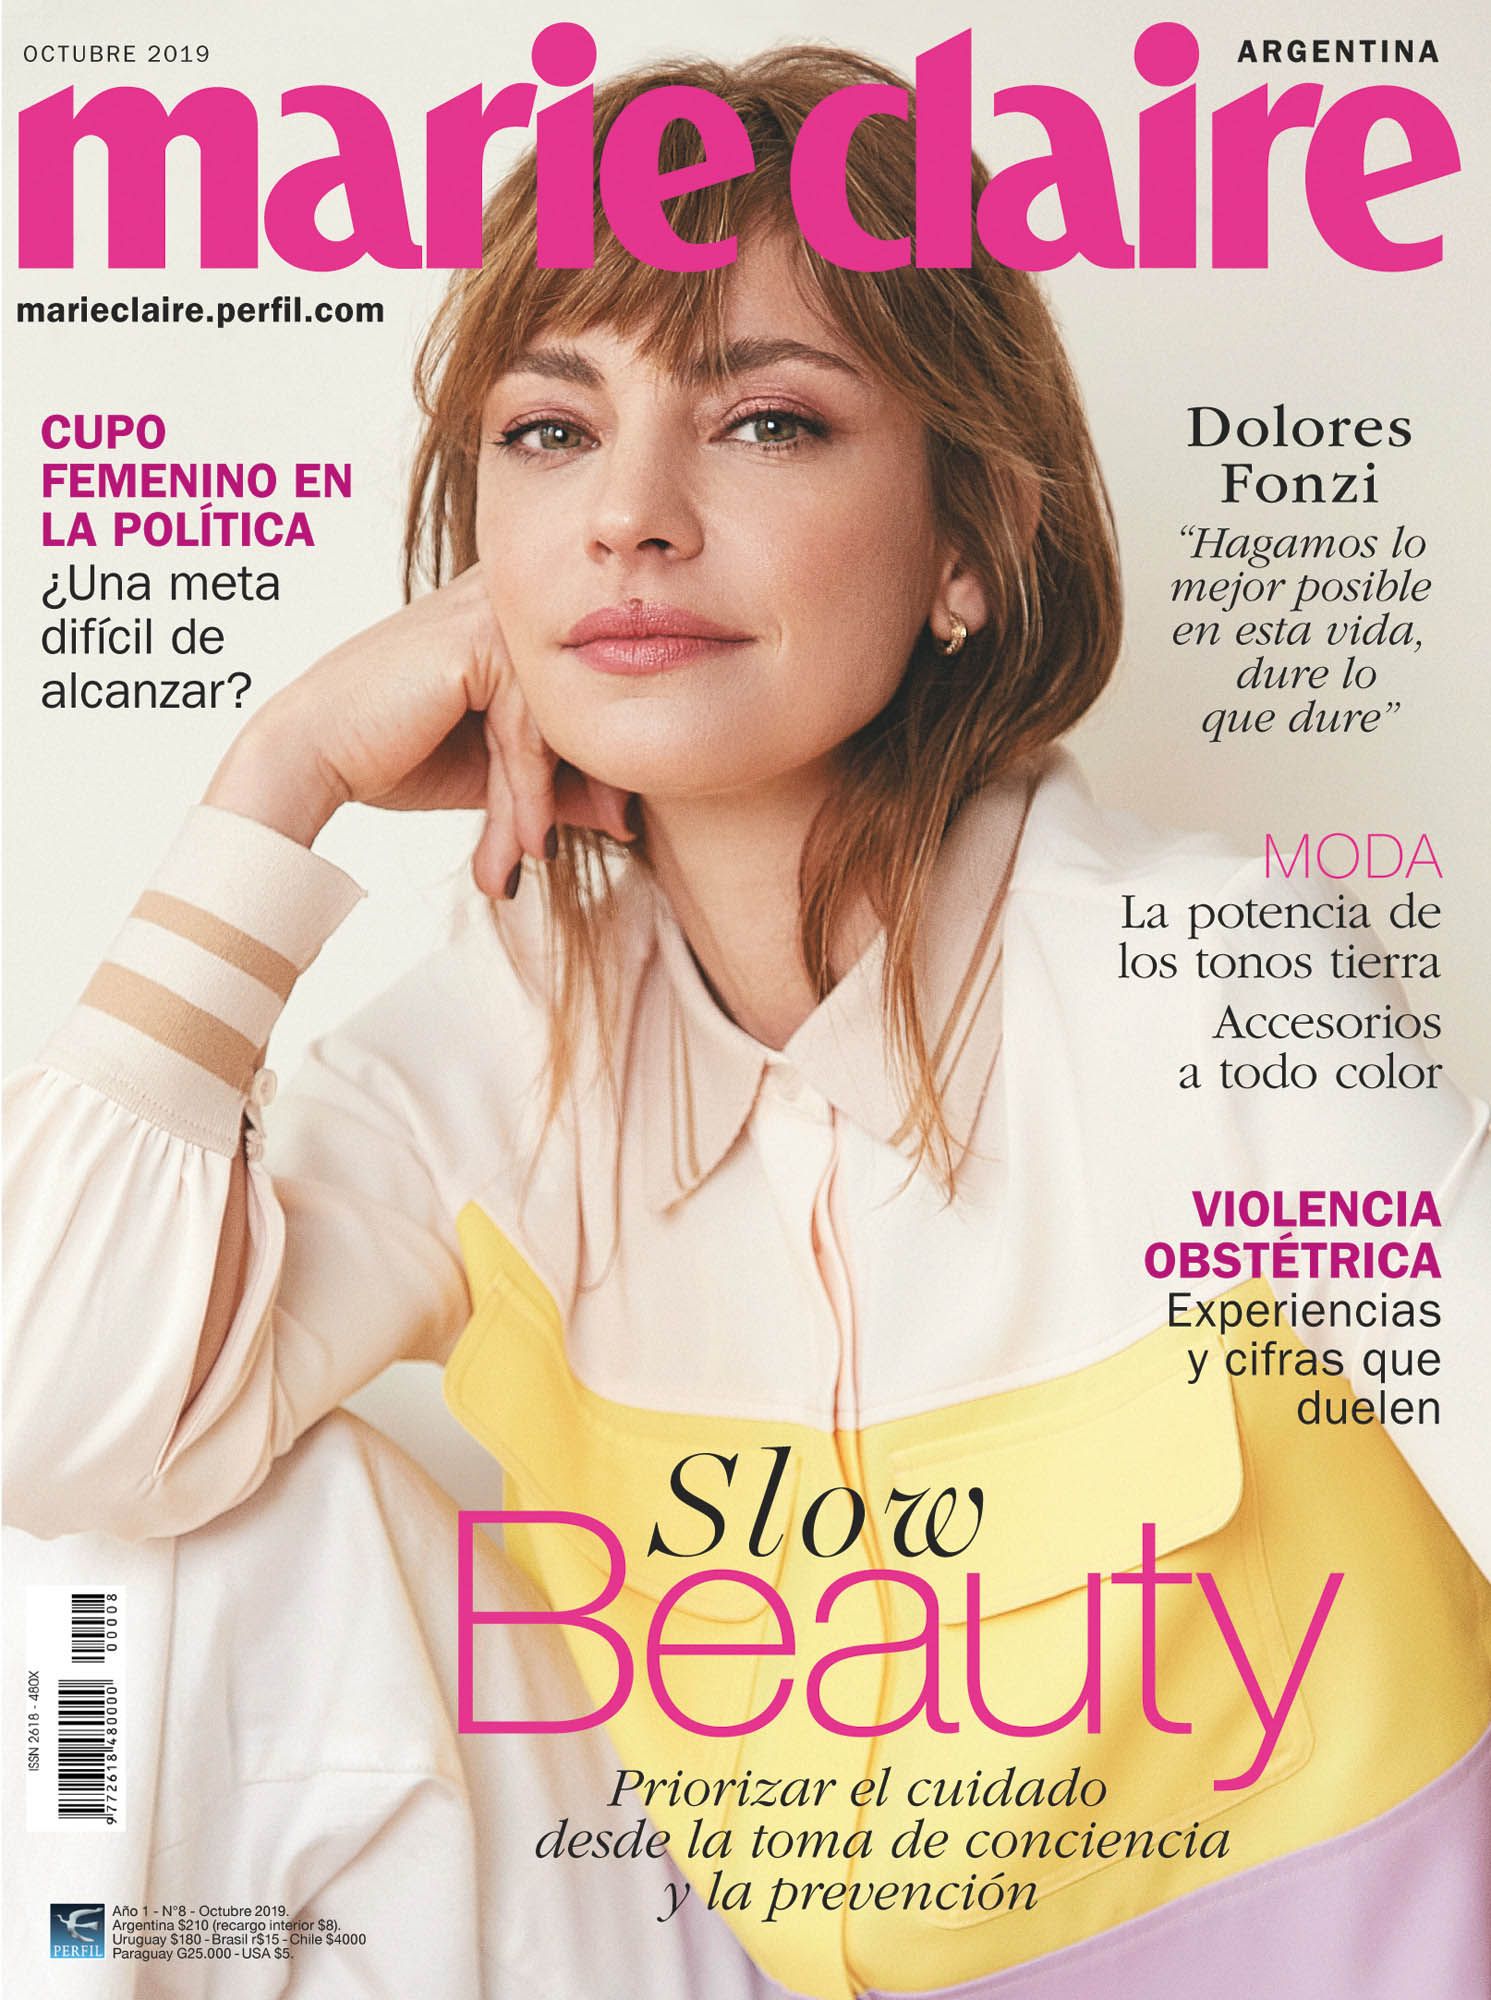 Marie Claire. Marie Claire - октябрь 2019. Marie Claire журнал. Marie Claire Каскад.